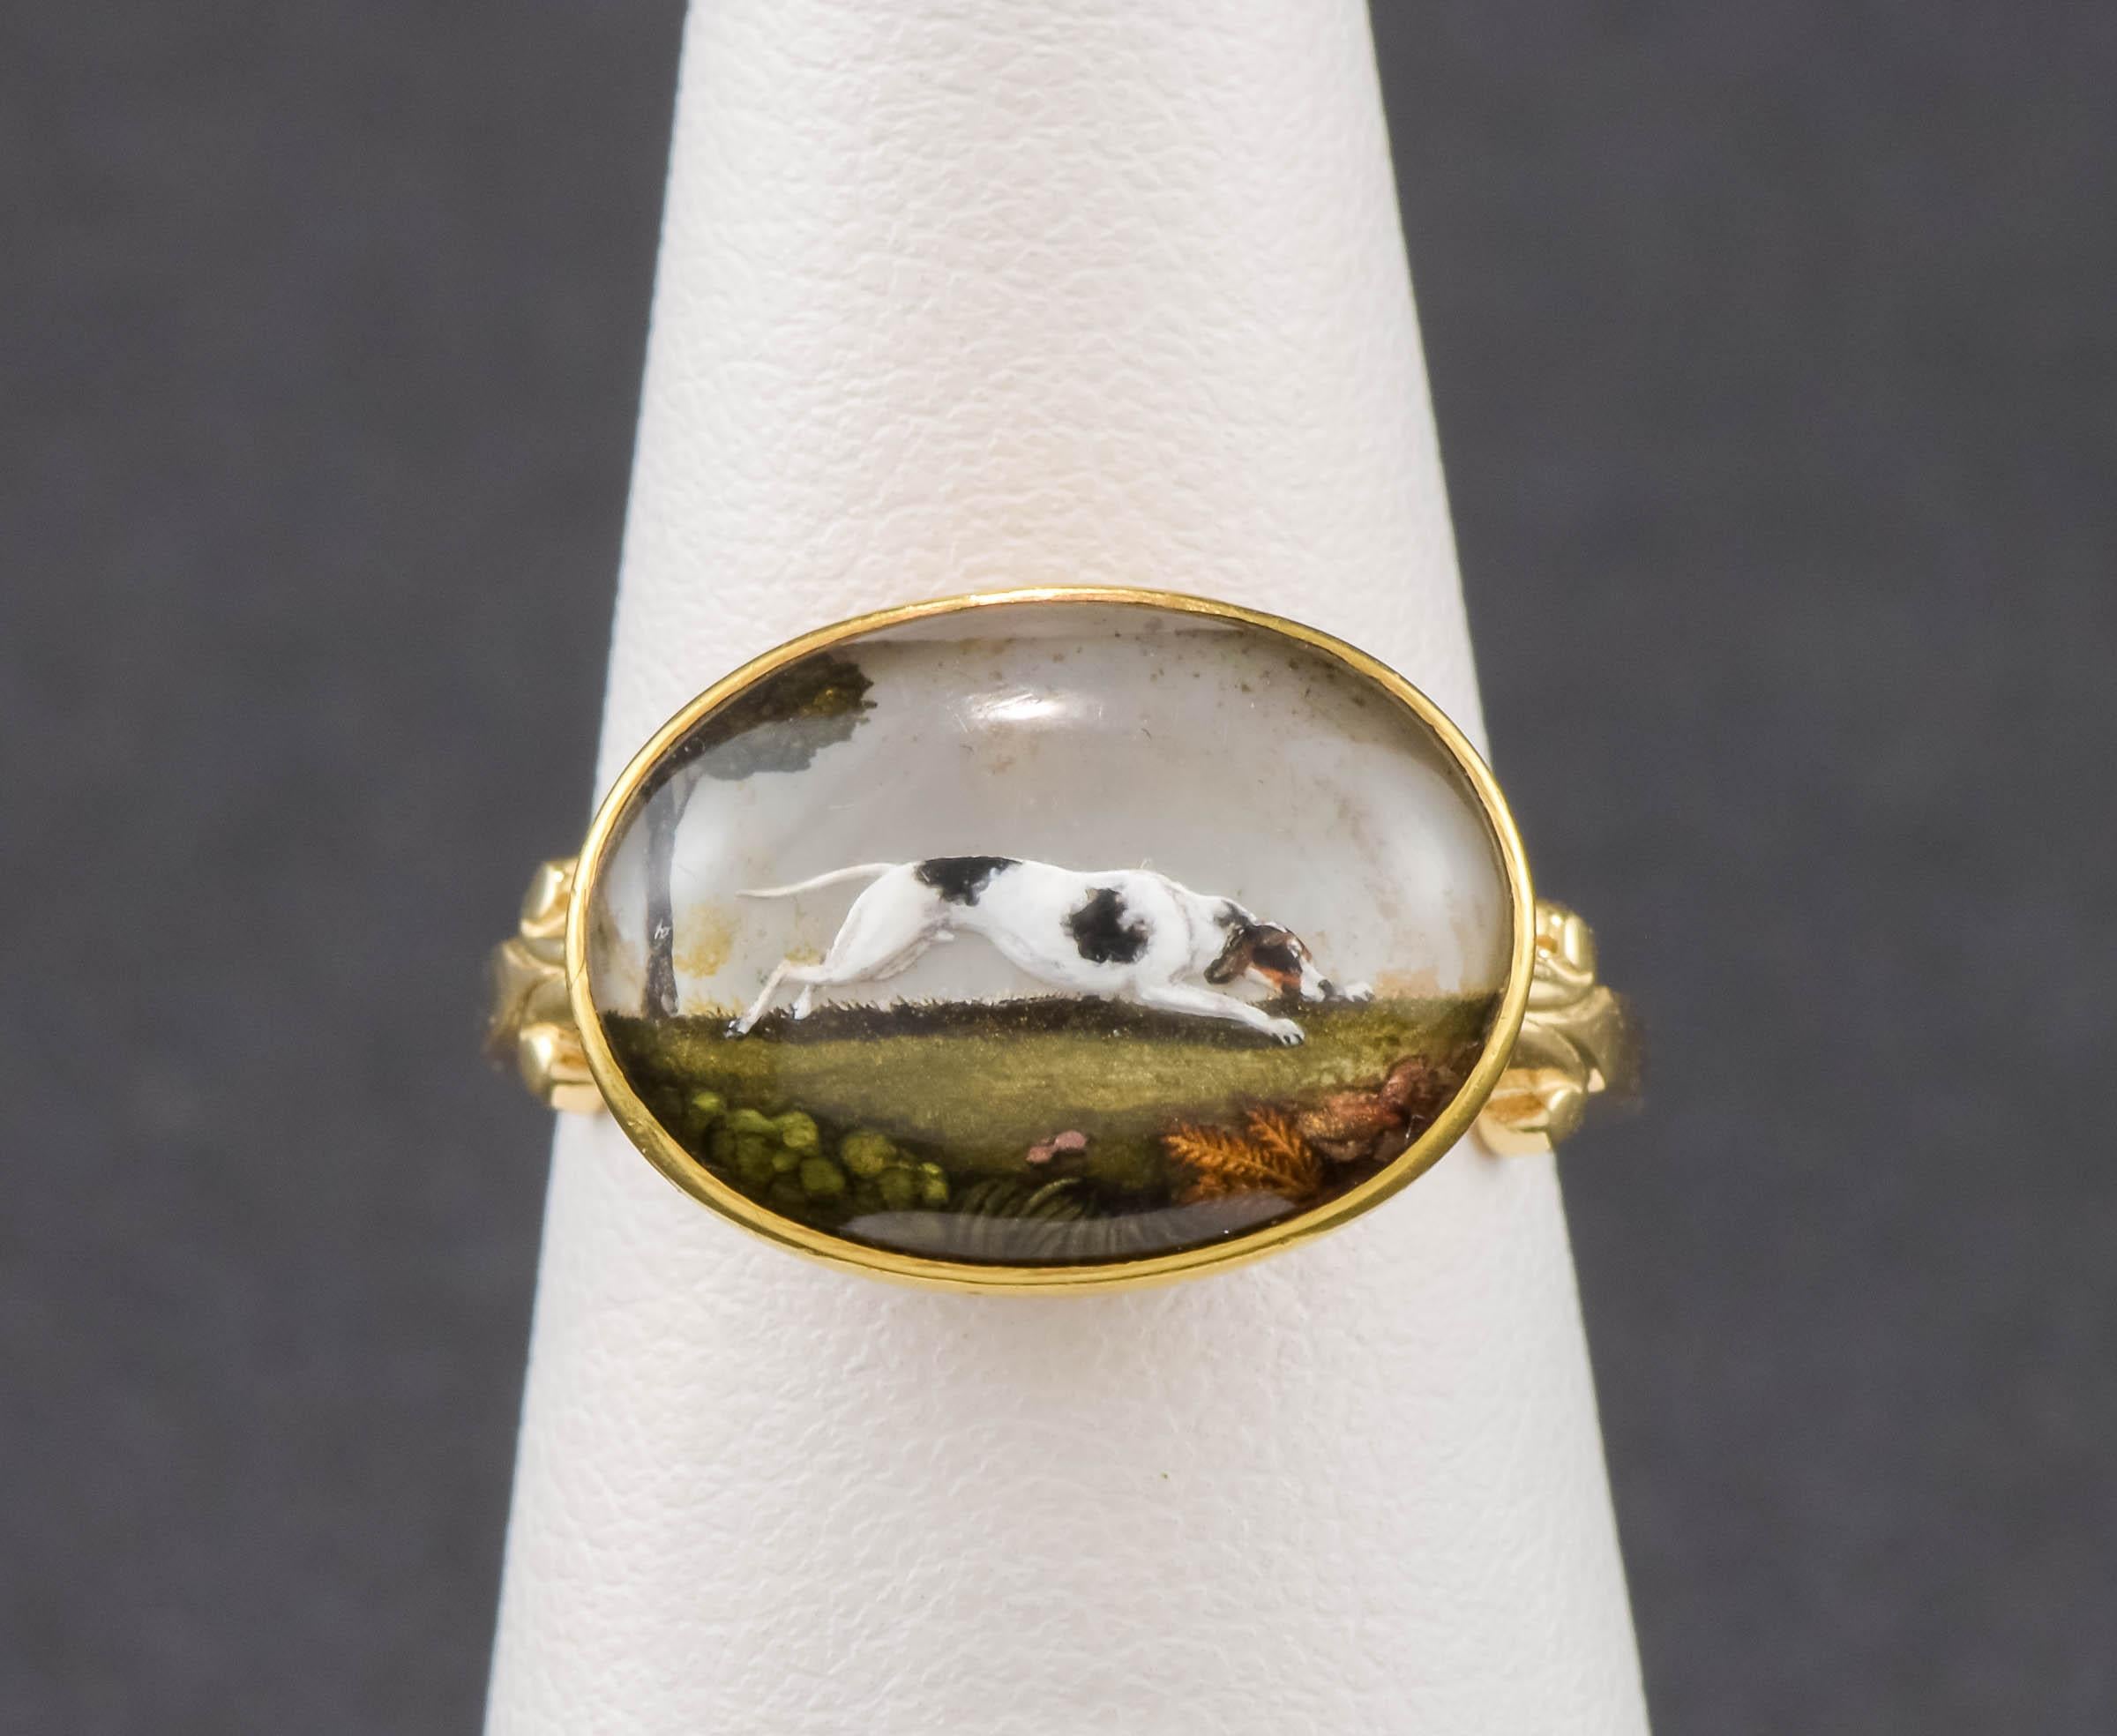 Originally part of a pair of fine 18K gold European cufflinks, this sweet running hound dog 'Essex Crystal' has been converted into a charming ring.  His brother has also been converted and is available in a separate listing.  This listing is just